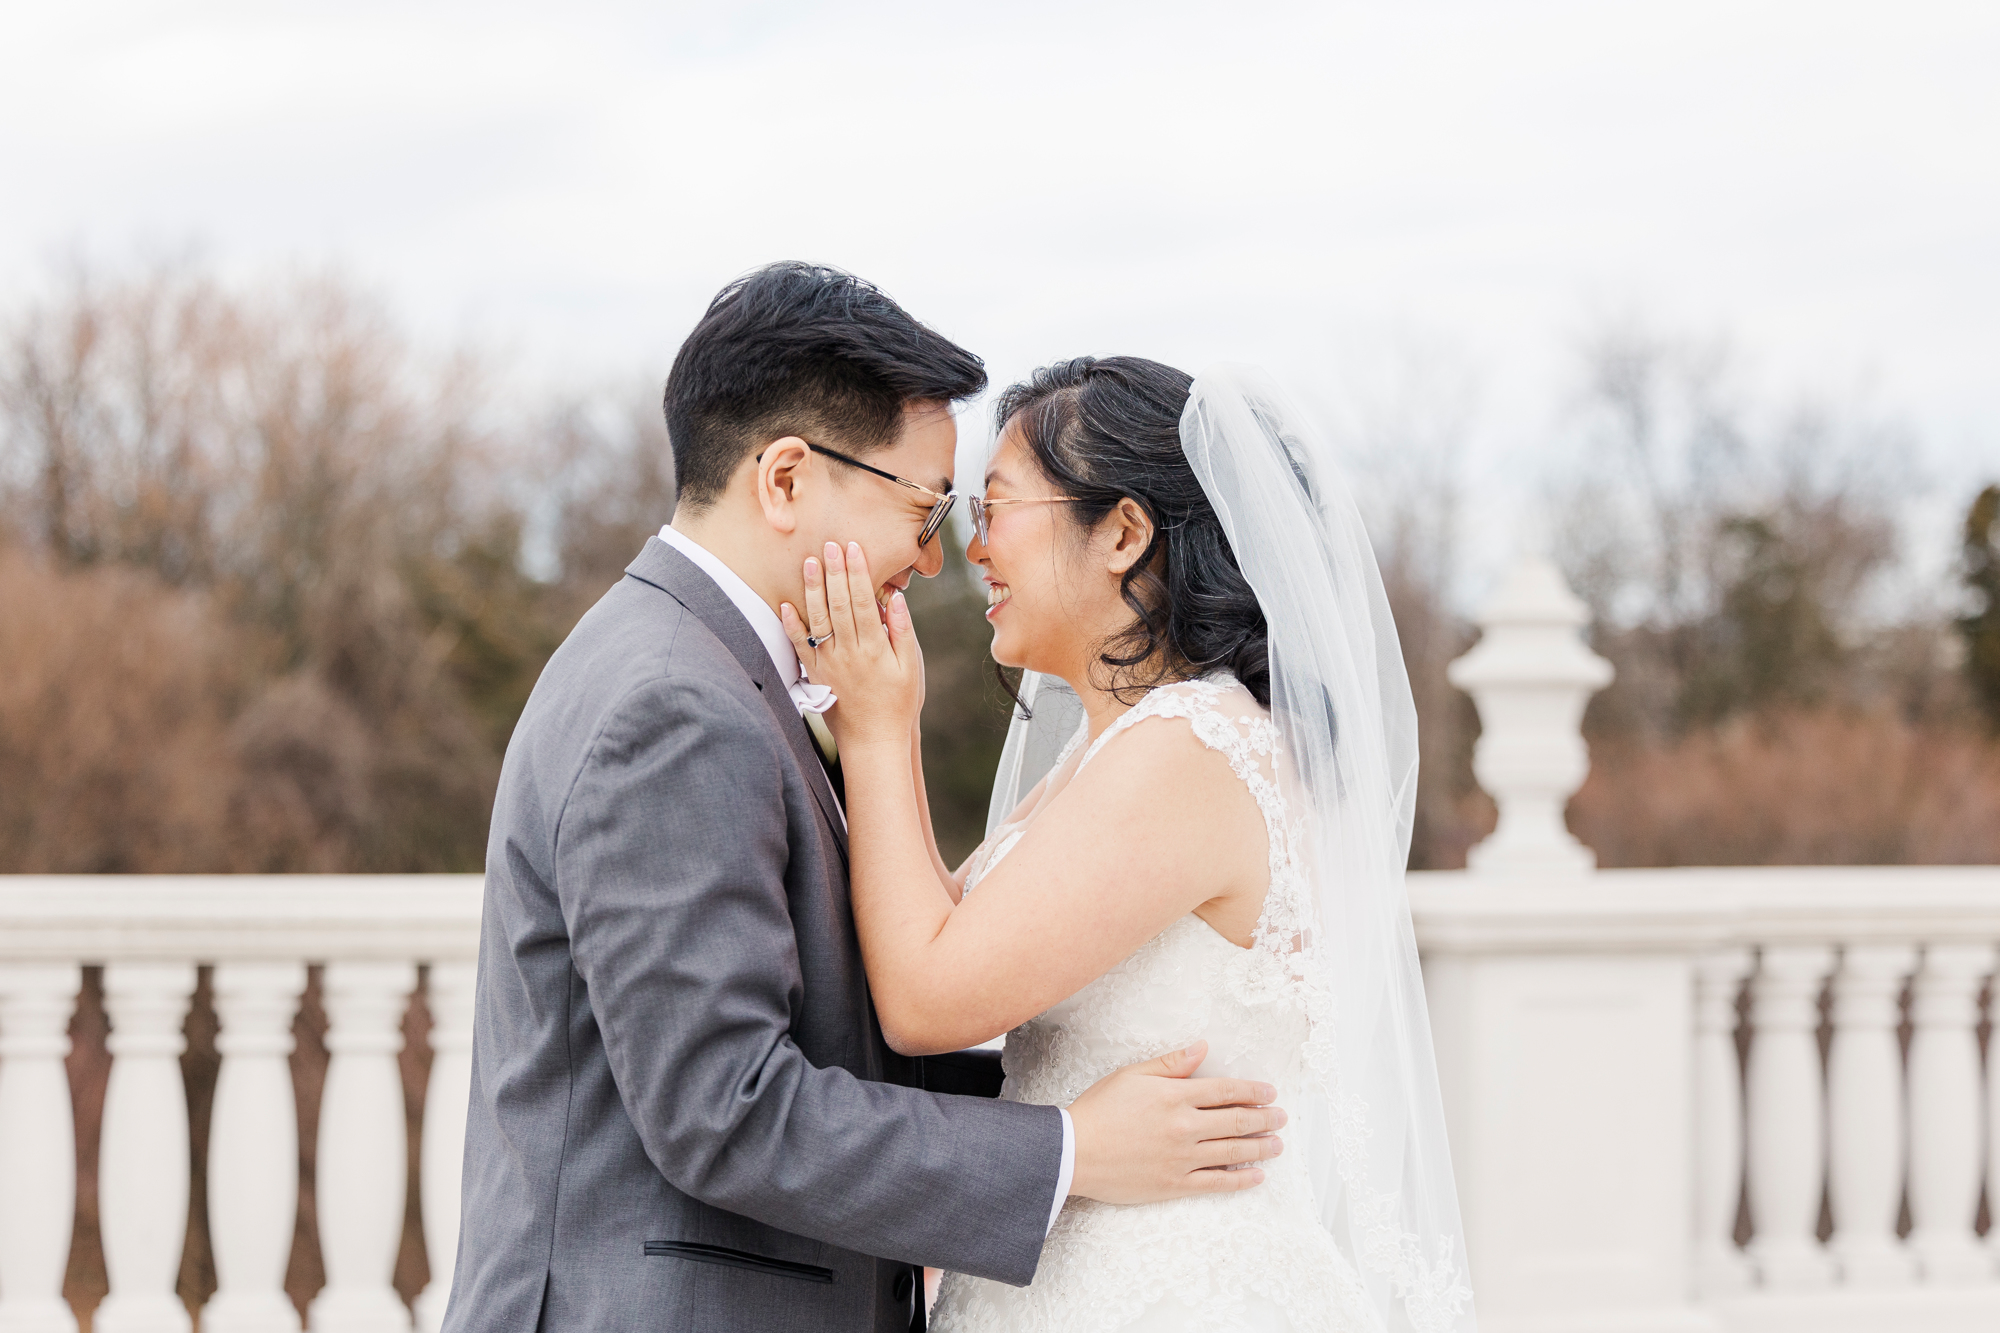 Social Media Strategy For Wedding Photography Businesses